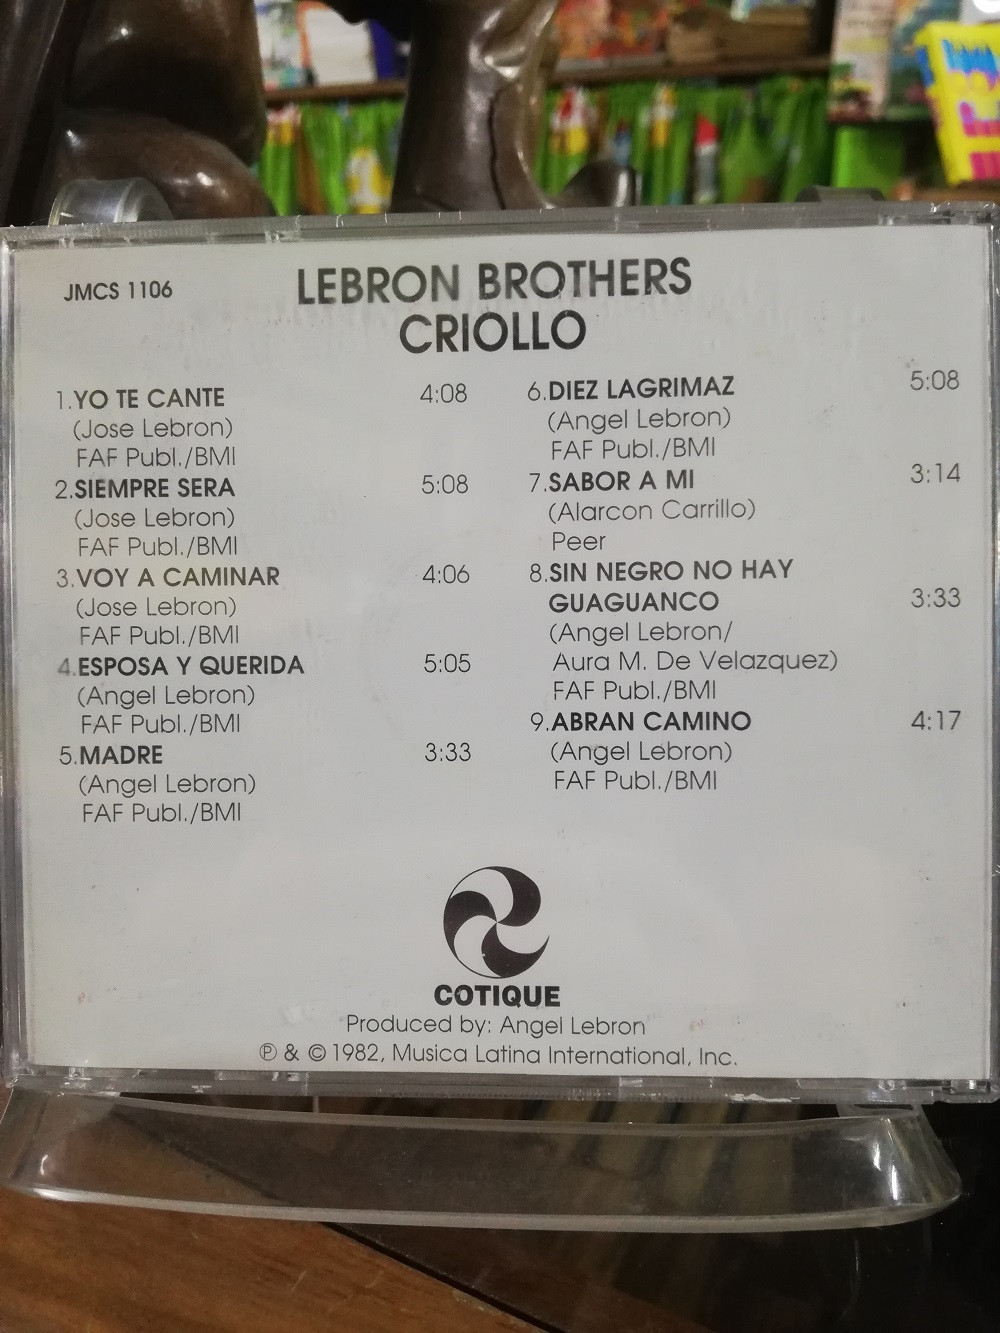 Imagen CD LEBRON BROTHERS - CRIOLLO 2